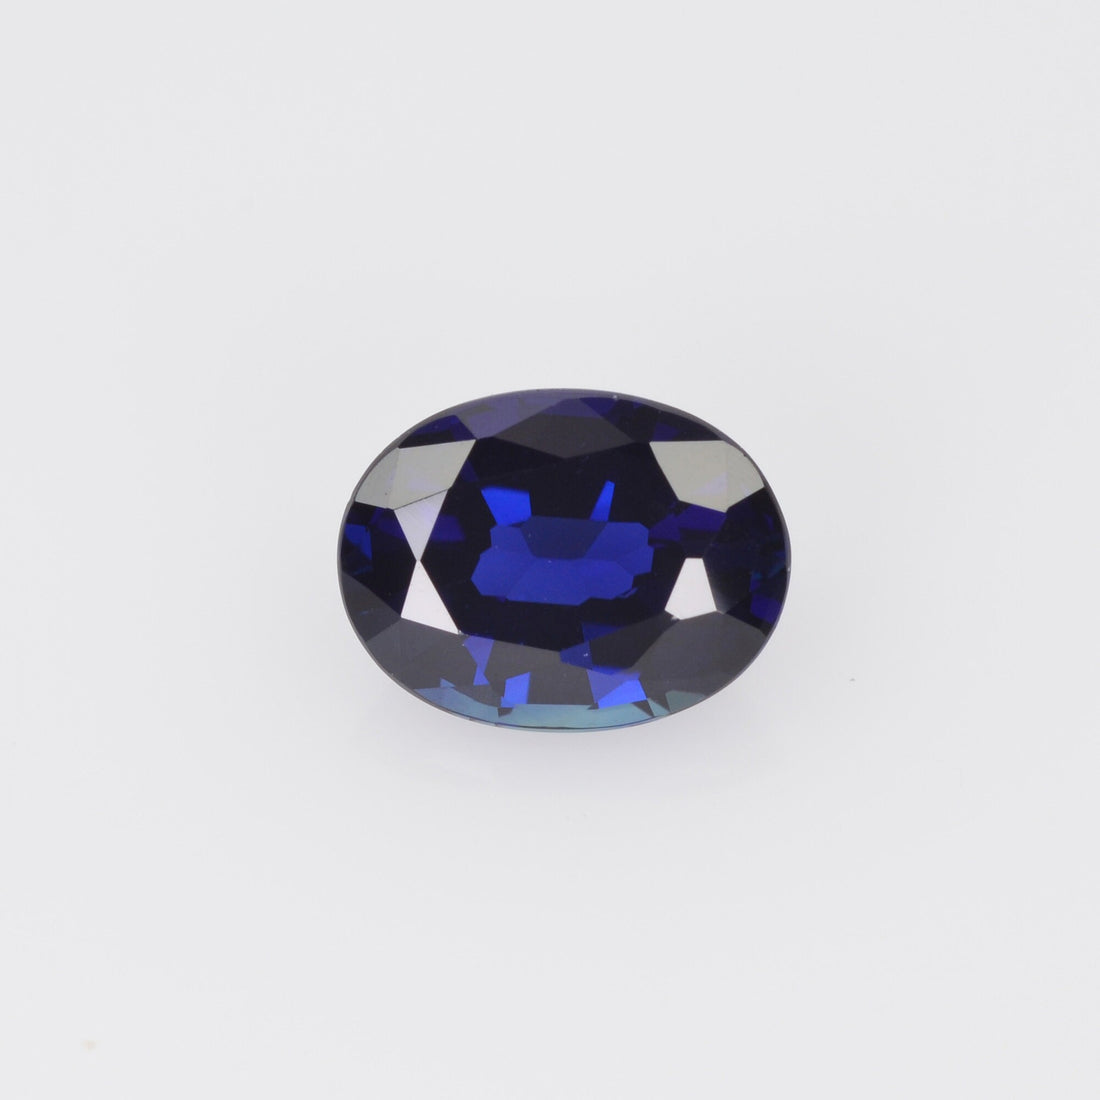 1.14 cts  Natural Blue Sapphire Loose Gemstone Oval Cut